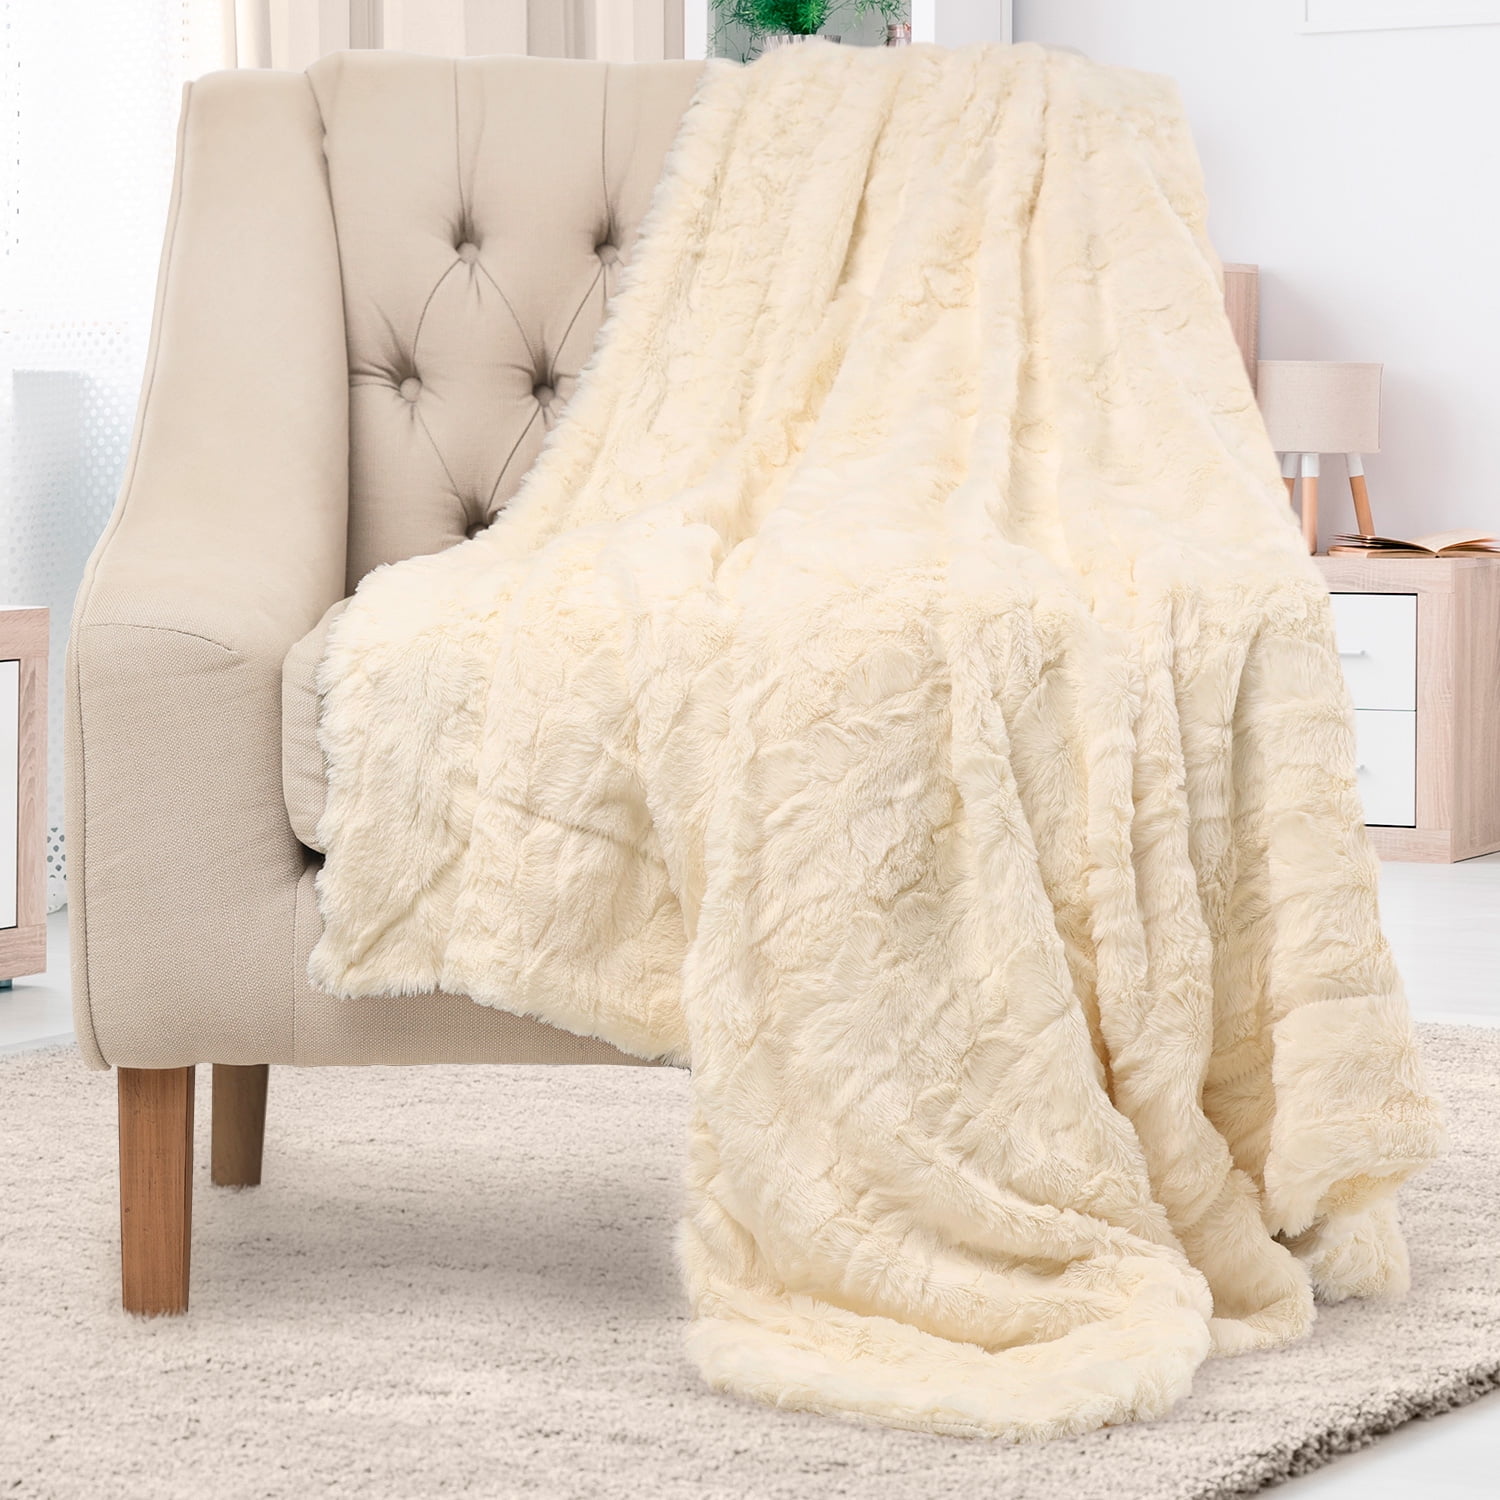 Tip Dyed Faux Fur Throw  Soft Cozy Warm and Fluffy 50 x 60 inches White Mink 